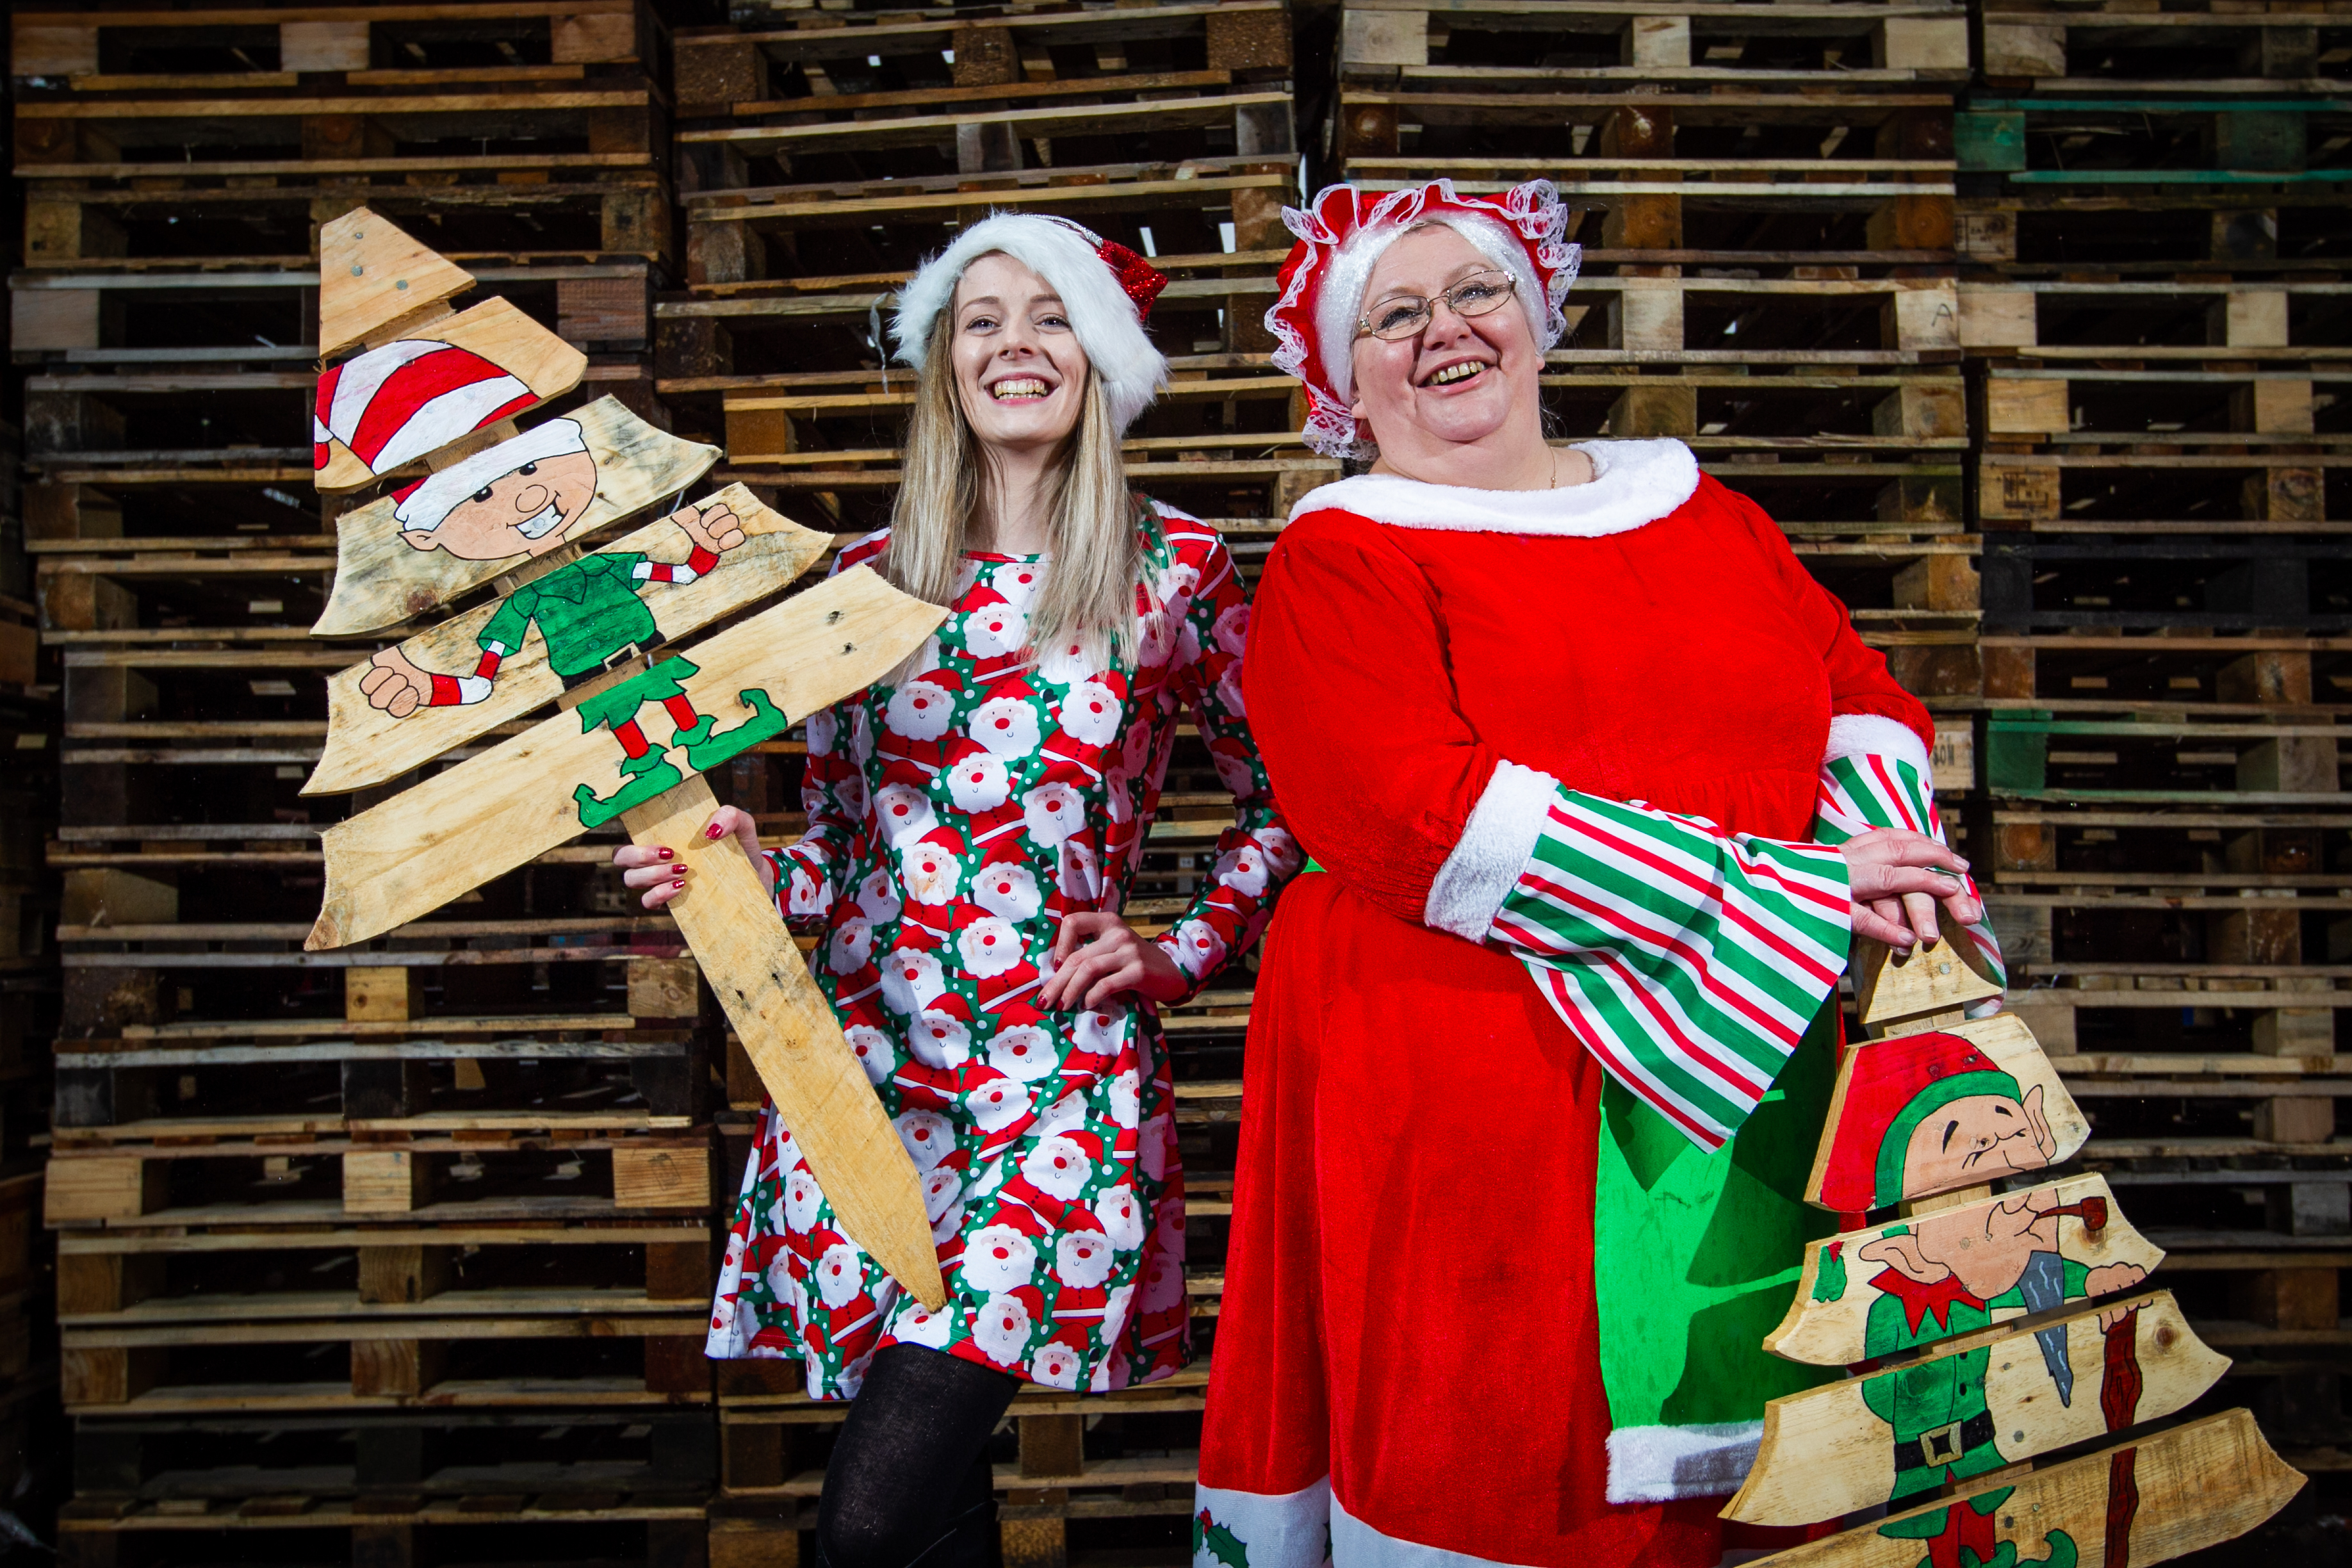 Tracy Gibson and daughter Amy Gibson, holding a Christmas fundraiser sellling Christmas decorations made out of wooden pallets from their business, Mustoes Pallets. The business was owned by Jack Mustoe (father and grandfather to Tracy and Amy), who was tragically killed in the yard by being run over by a lorry. (Andrew Cawley).